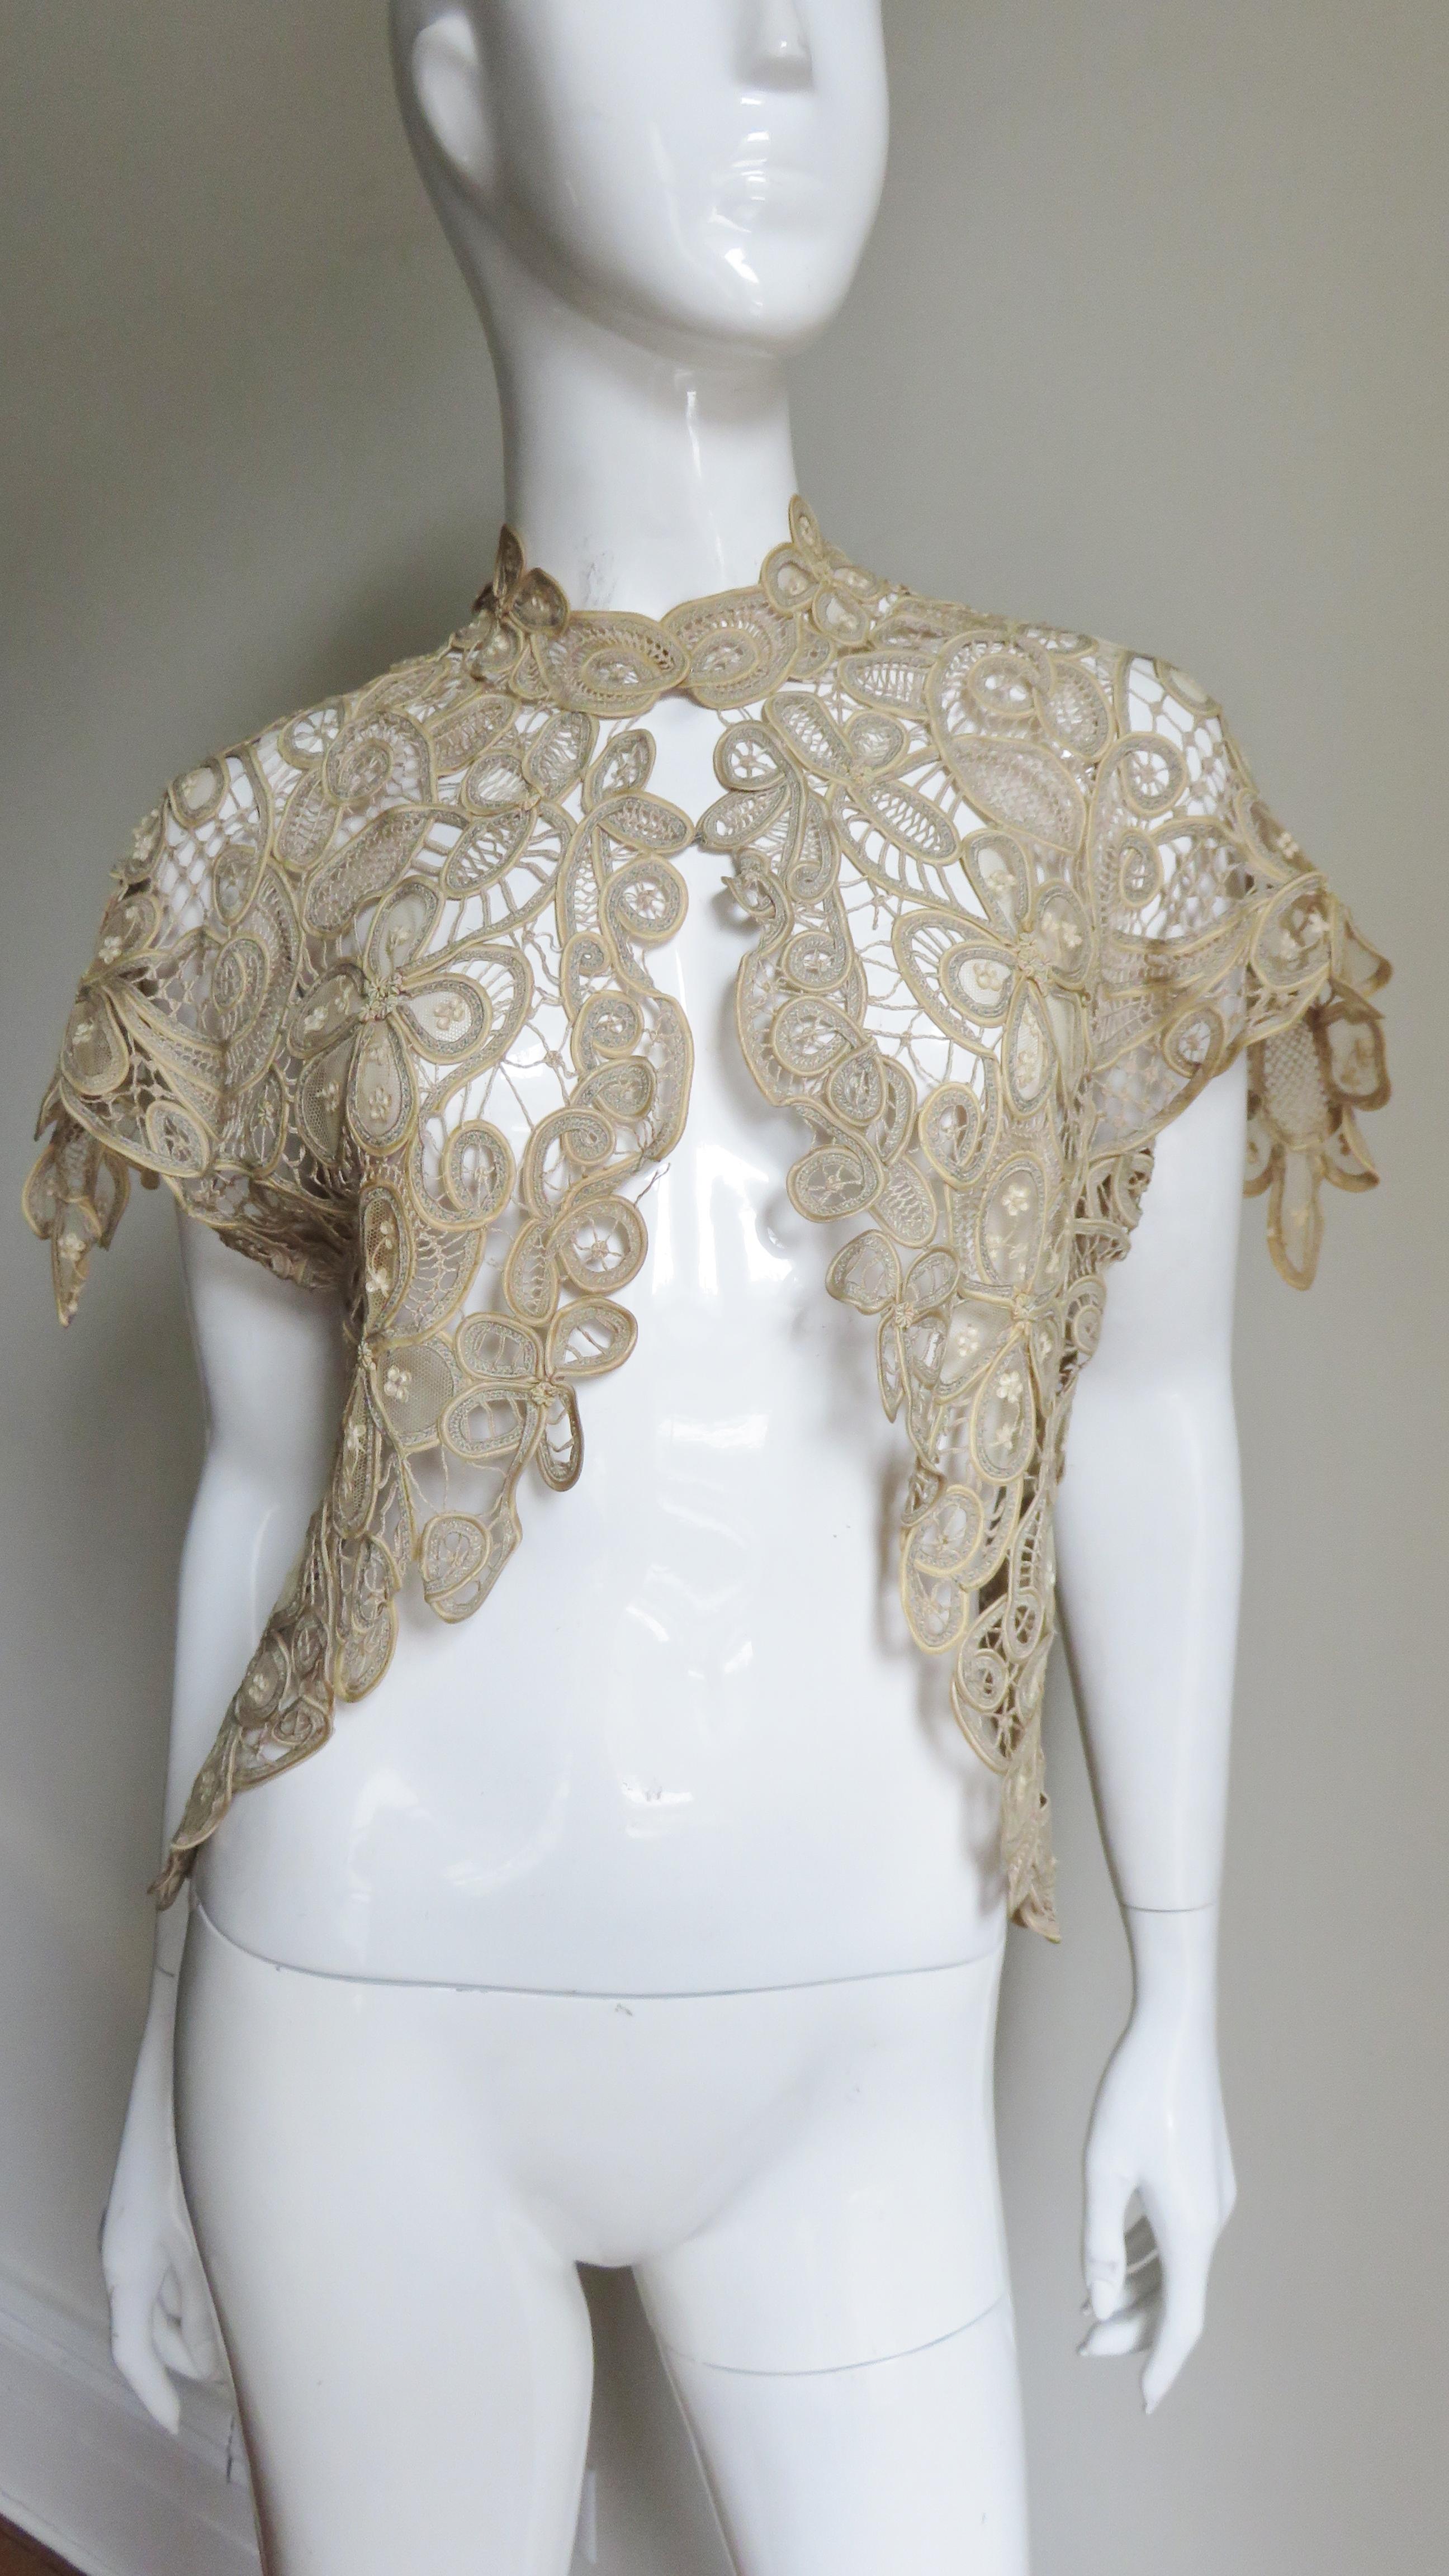 An intricate, stunning, vintage beige silk lace jacket, bolero, shrug, vest in varying stitches and patterns of flowers and petals- very elaborate. The shoulders are extended forming cap sleeves.  The hem which dips longer at the sides, sleeves, and